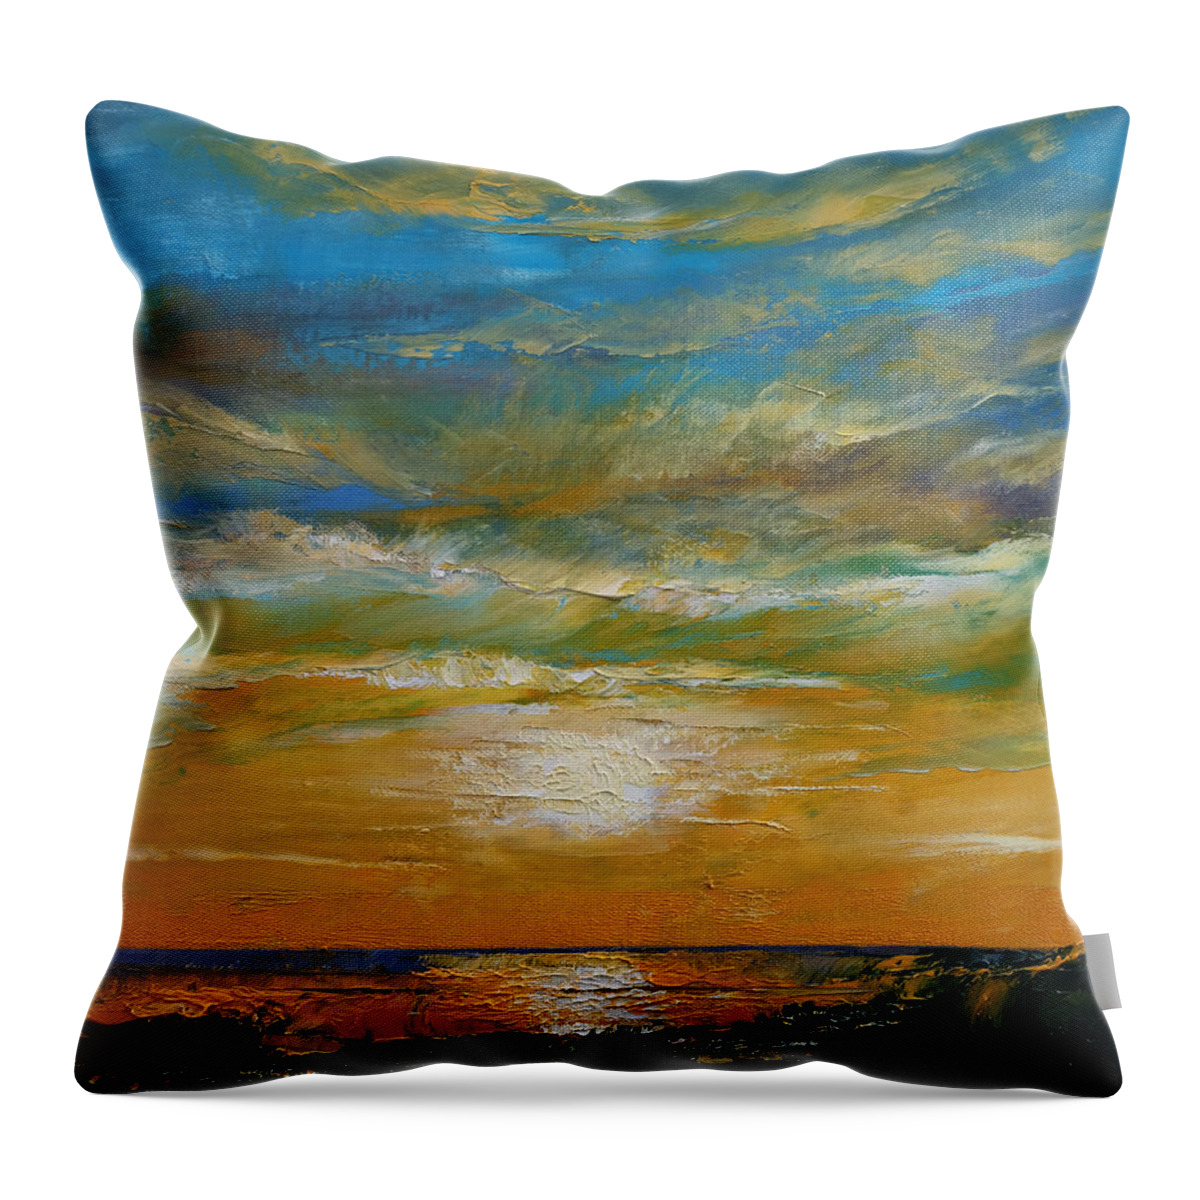 Art Throw Pillow featuring the painting Hawaii Orange Sunset by Michael Creese